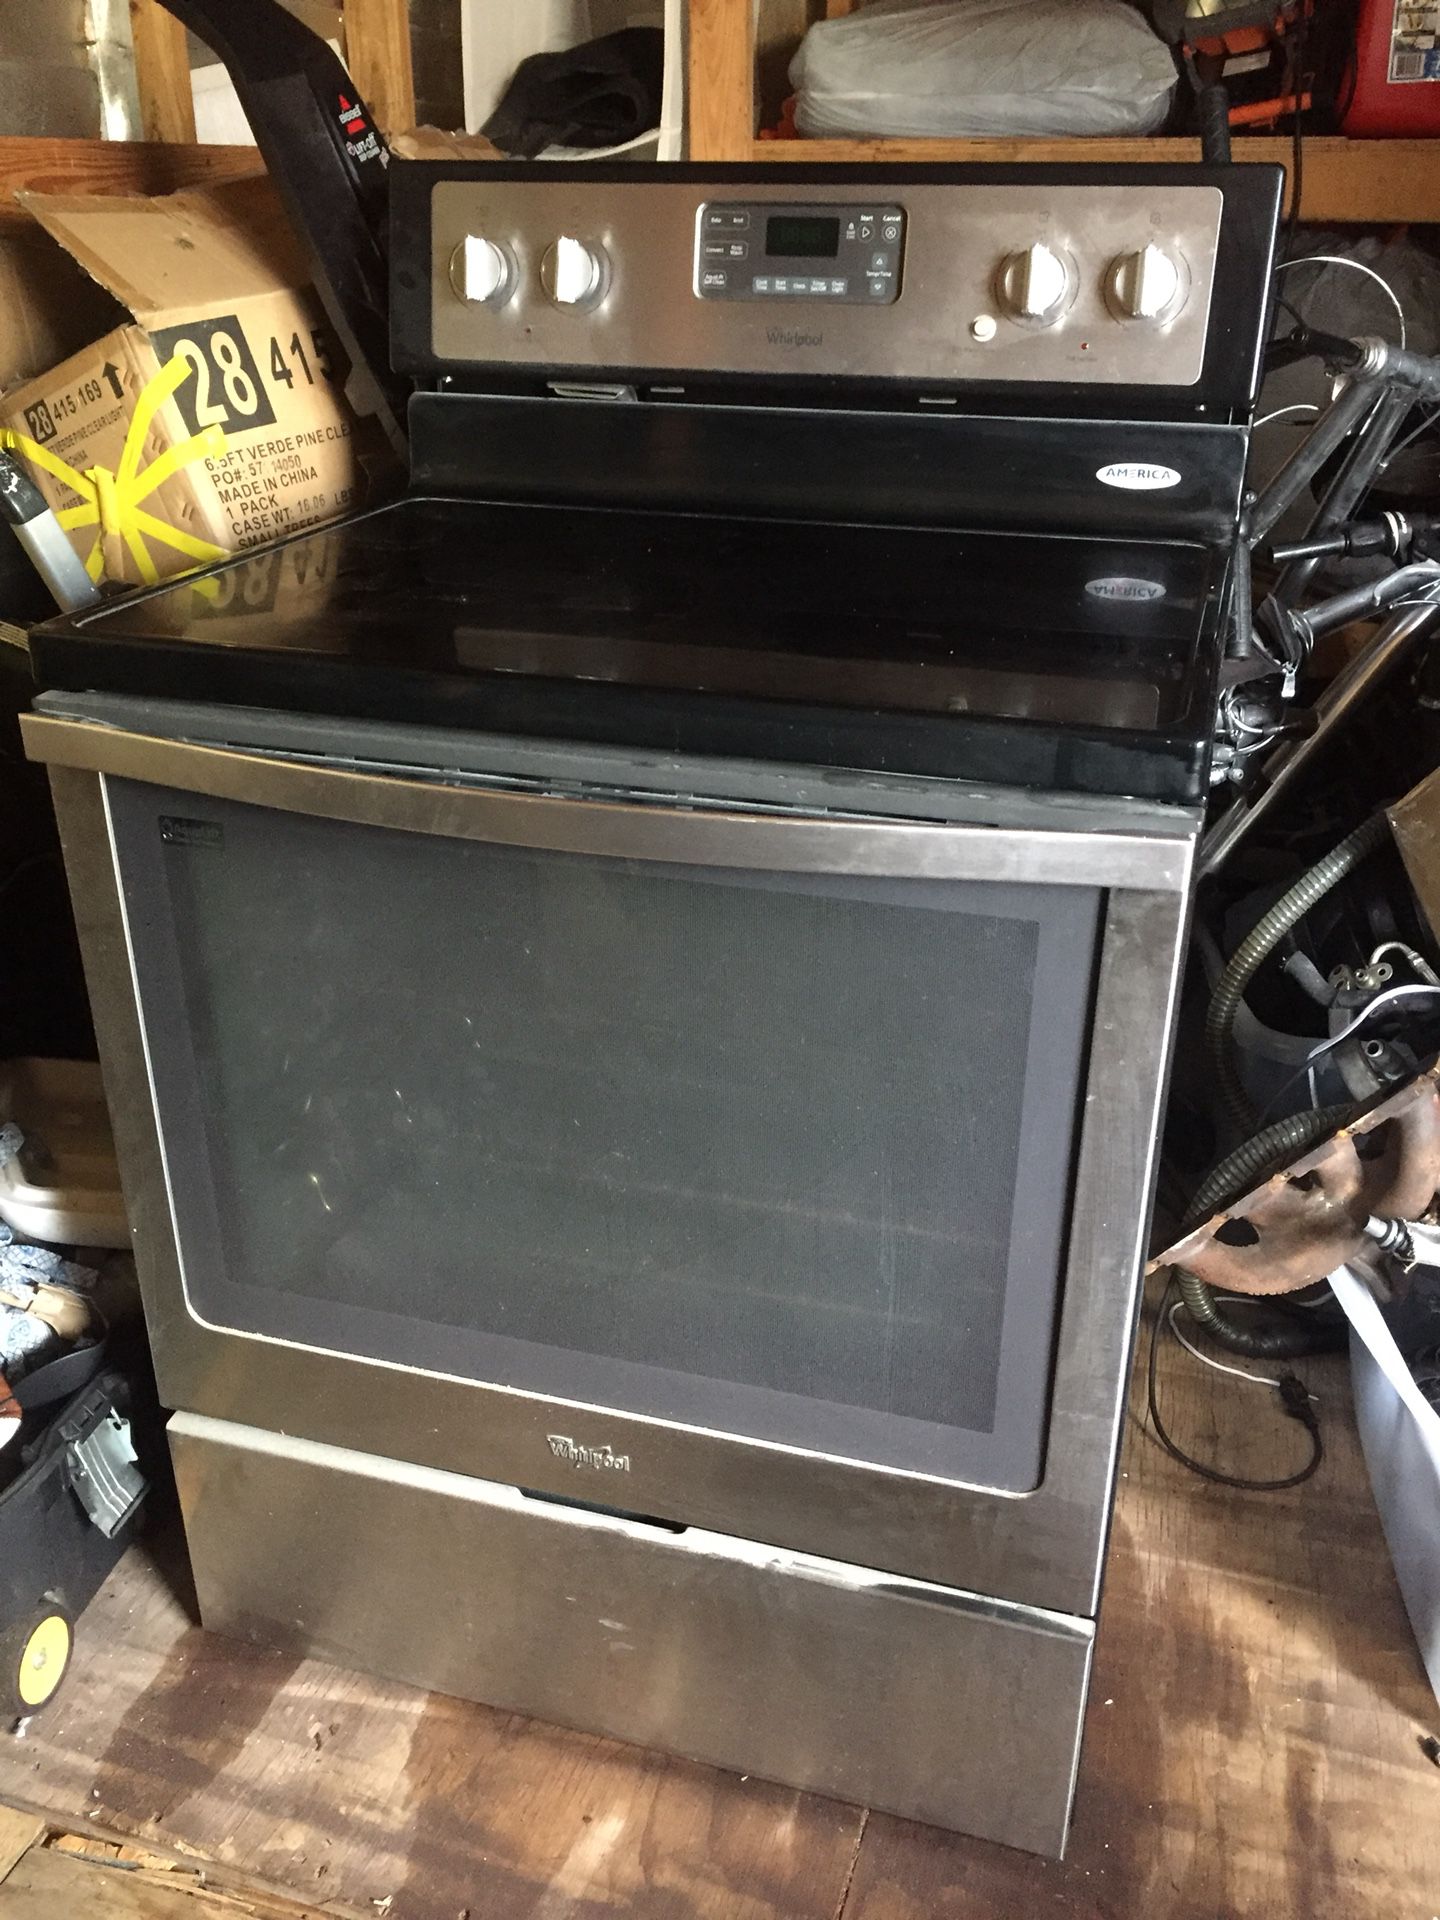 Whirlpool stainless steel oven / stove